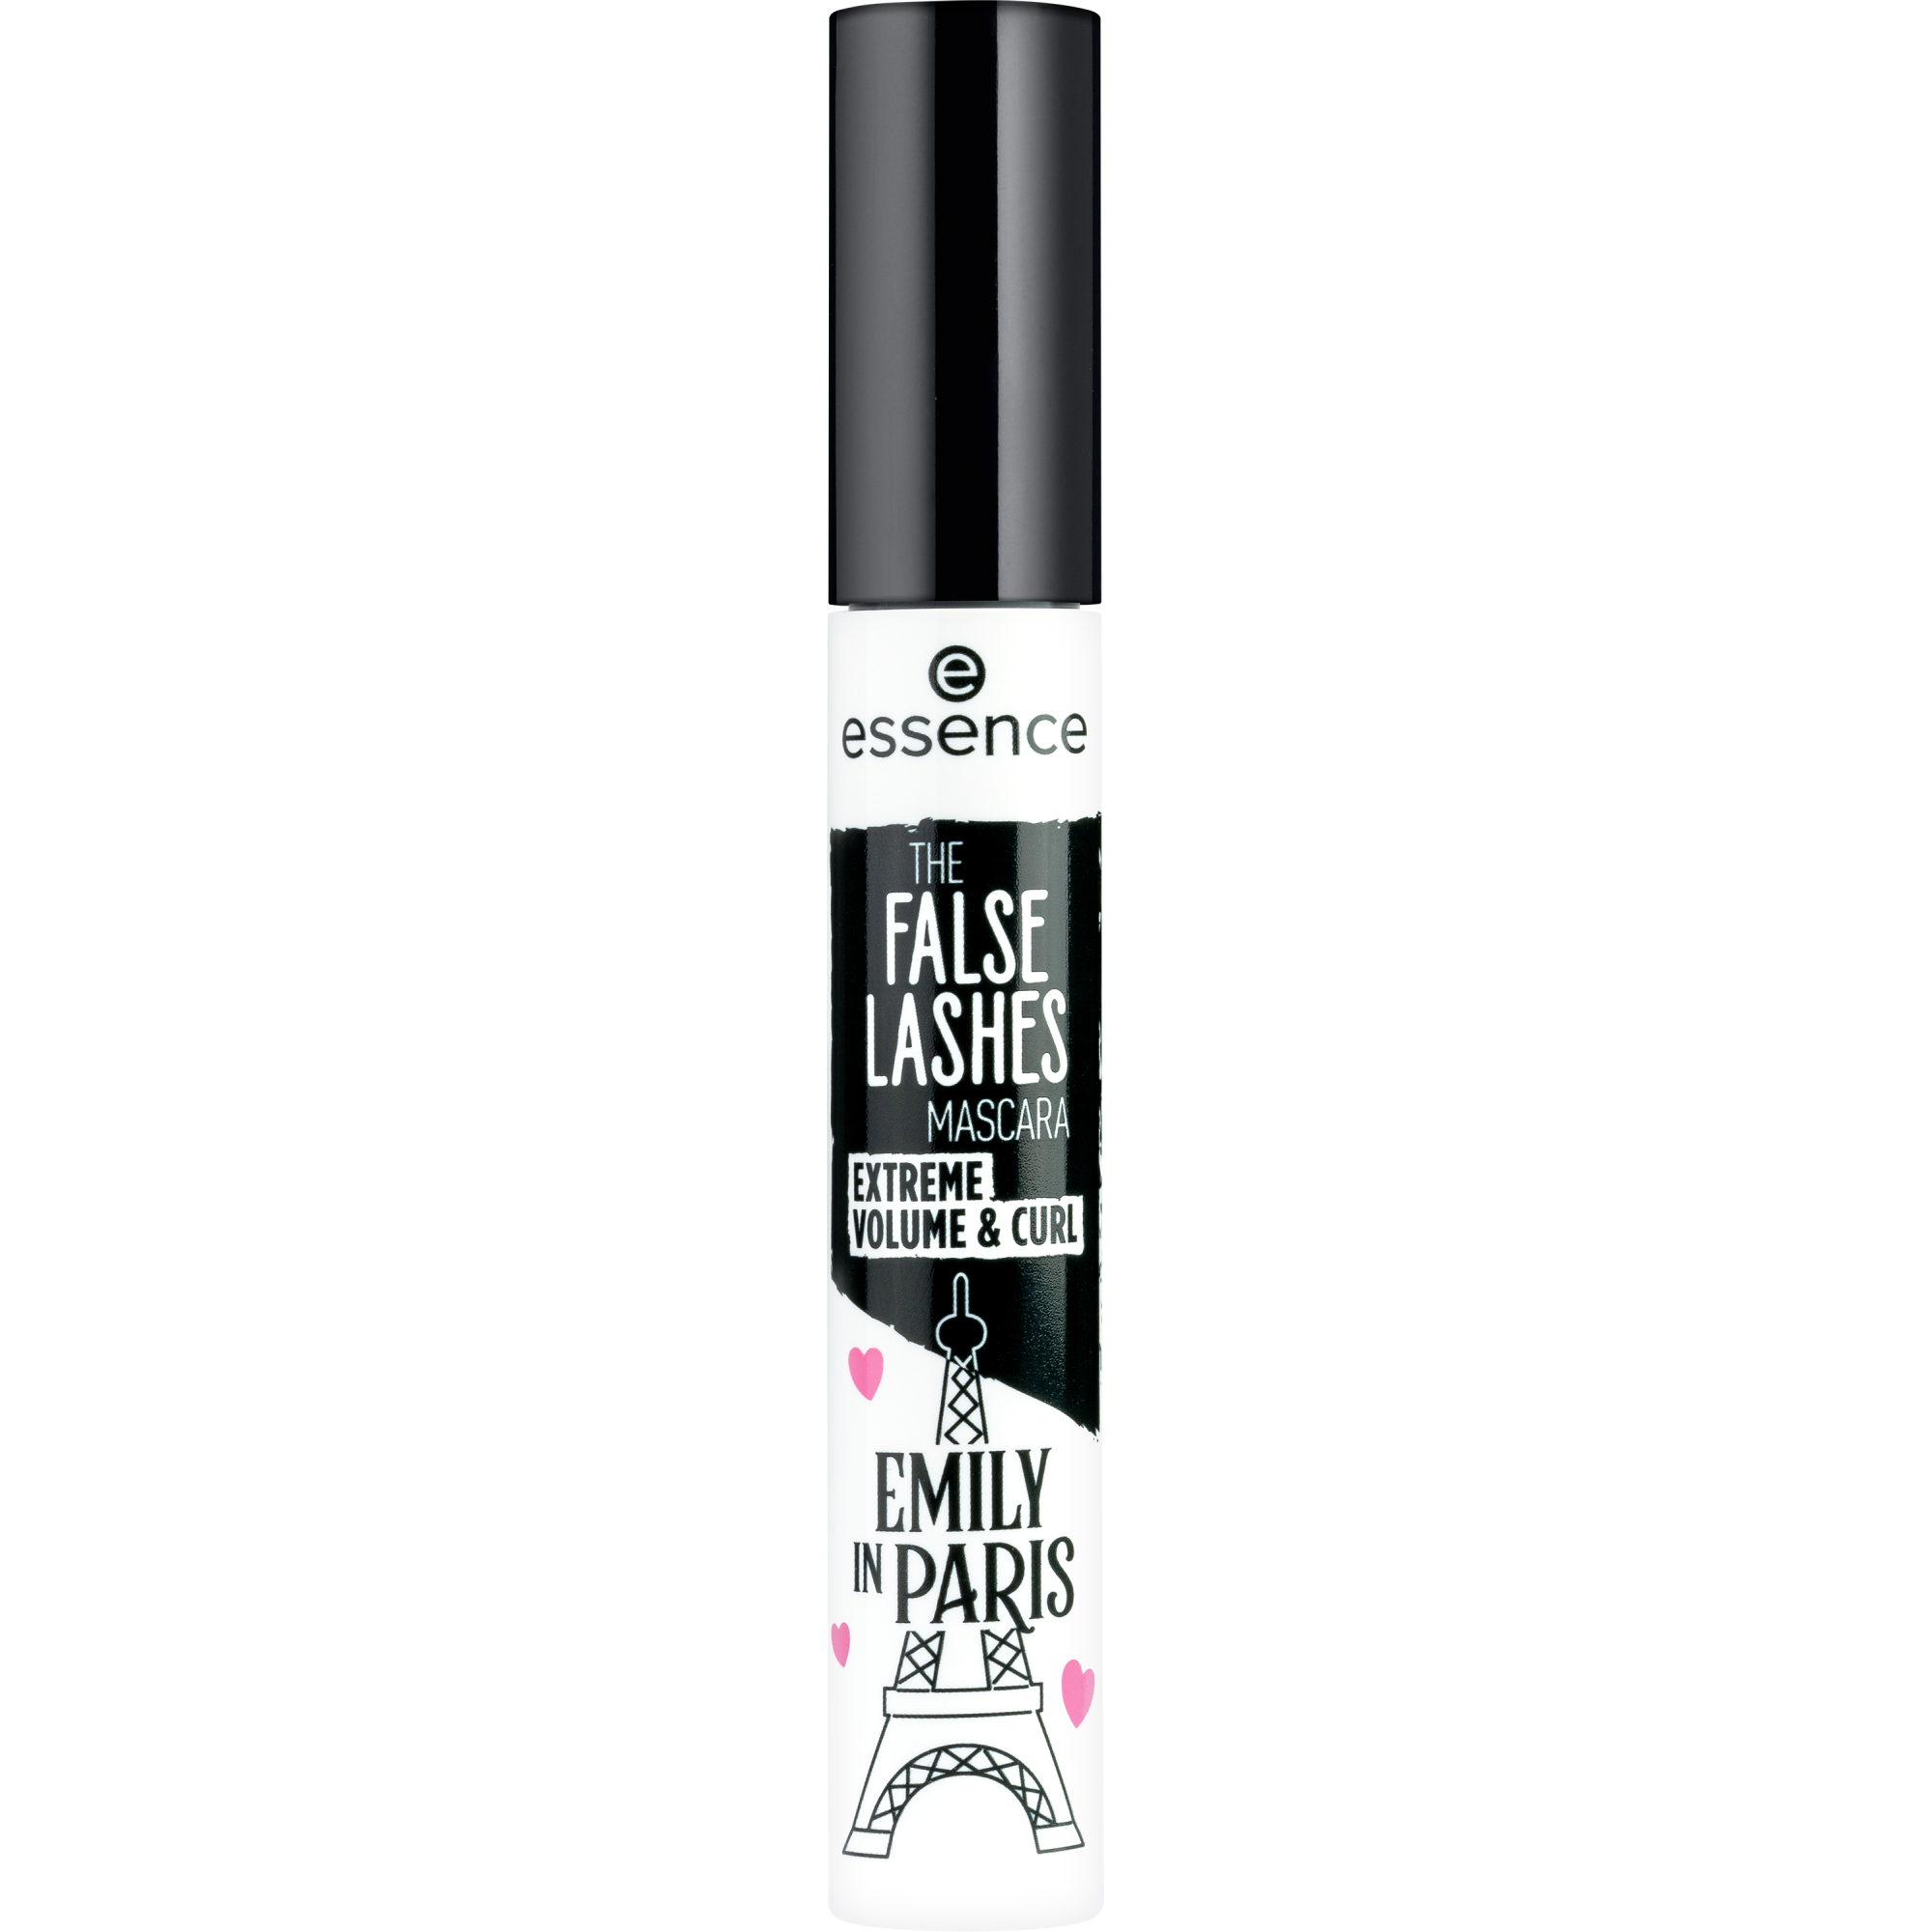 essence EMILY IN PARIS by essence THE FALSE LASHES MASCARA EXTREME VOLUME & CURL